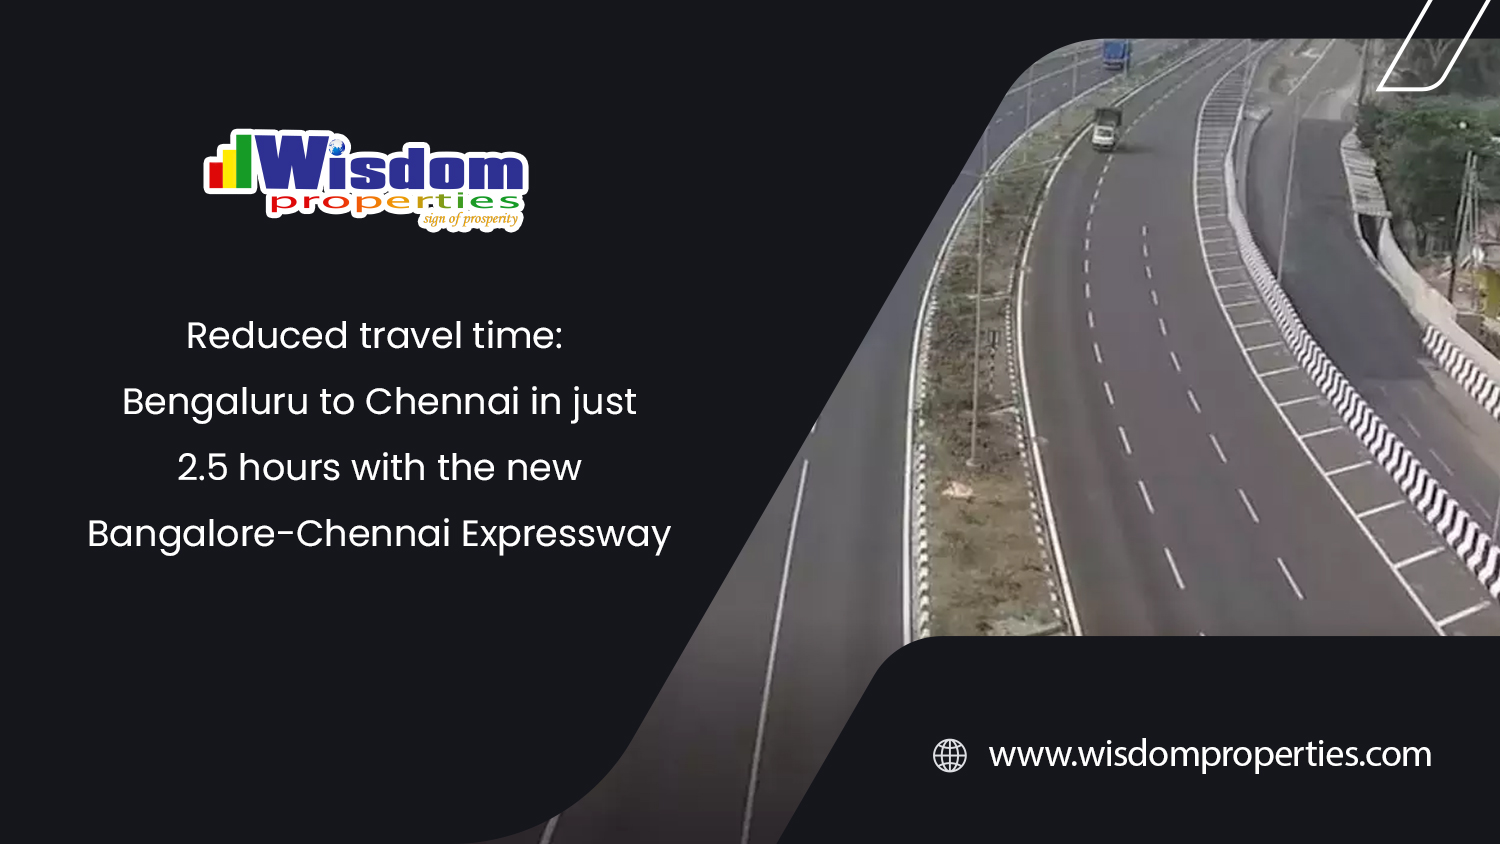 Game changer for South India Reduced travel time: Bengaluru to Chennai in just 2.5 hours with the new Bangalore-Chennai Expressway